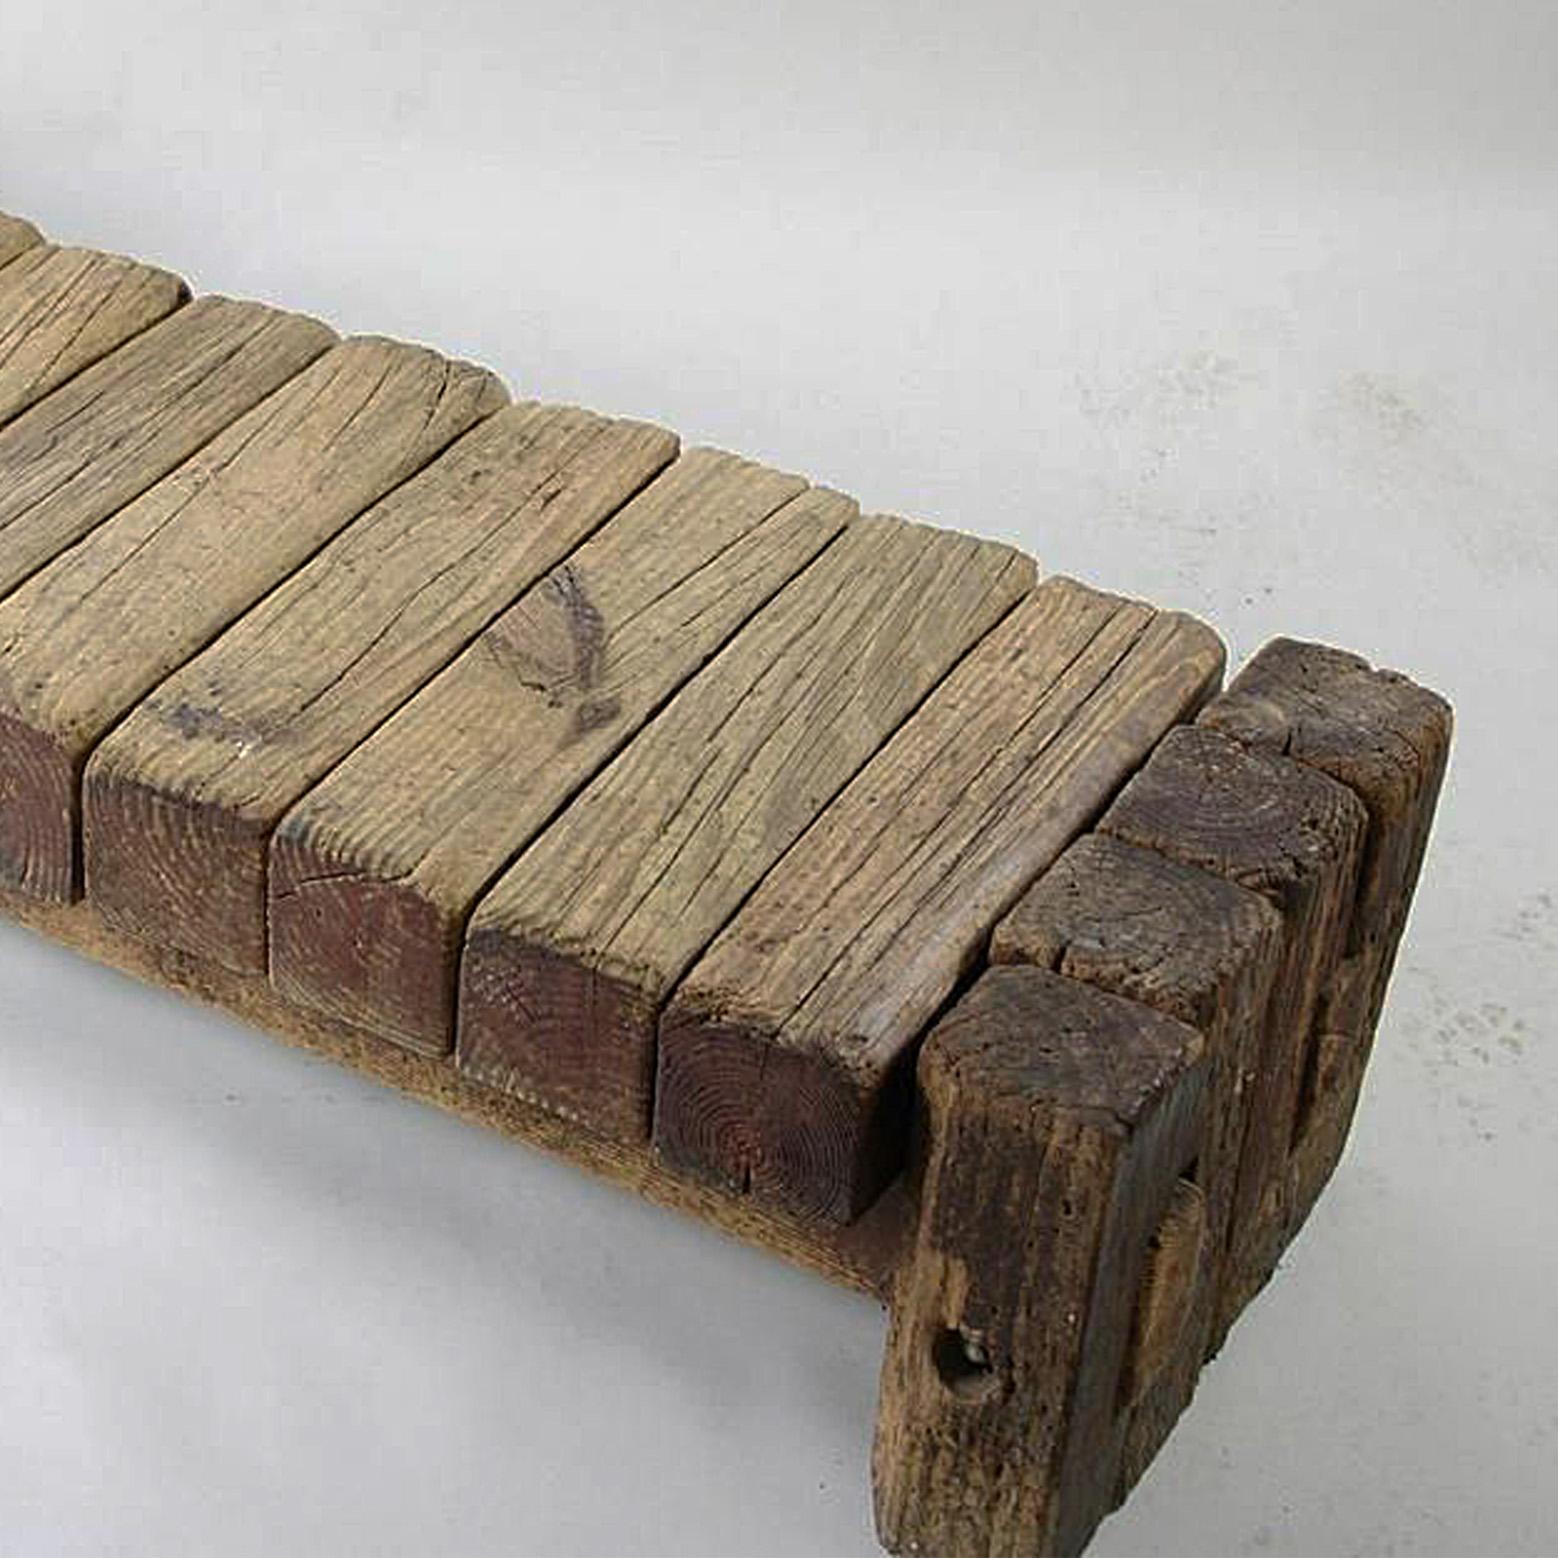 American Unusual Large Solid Pine Bench Made of Squared Logs 1960s / 1970s In Good Condition For Sale In Hudson, NY